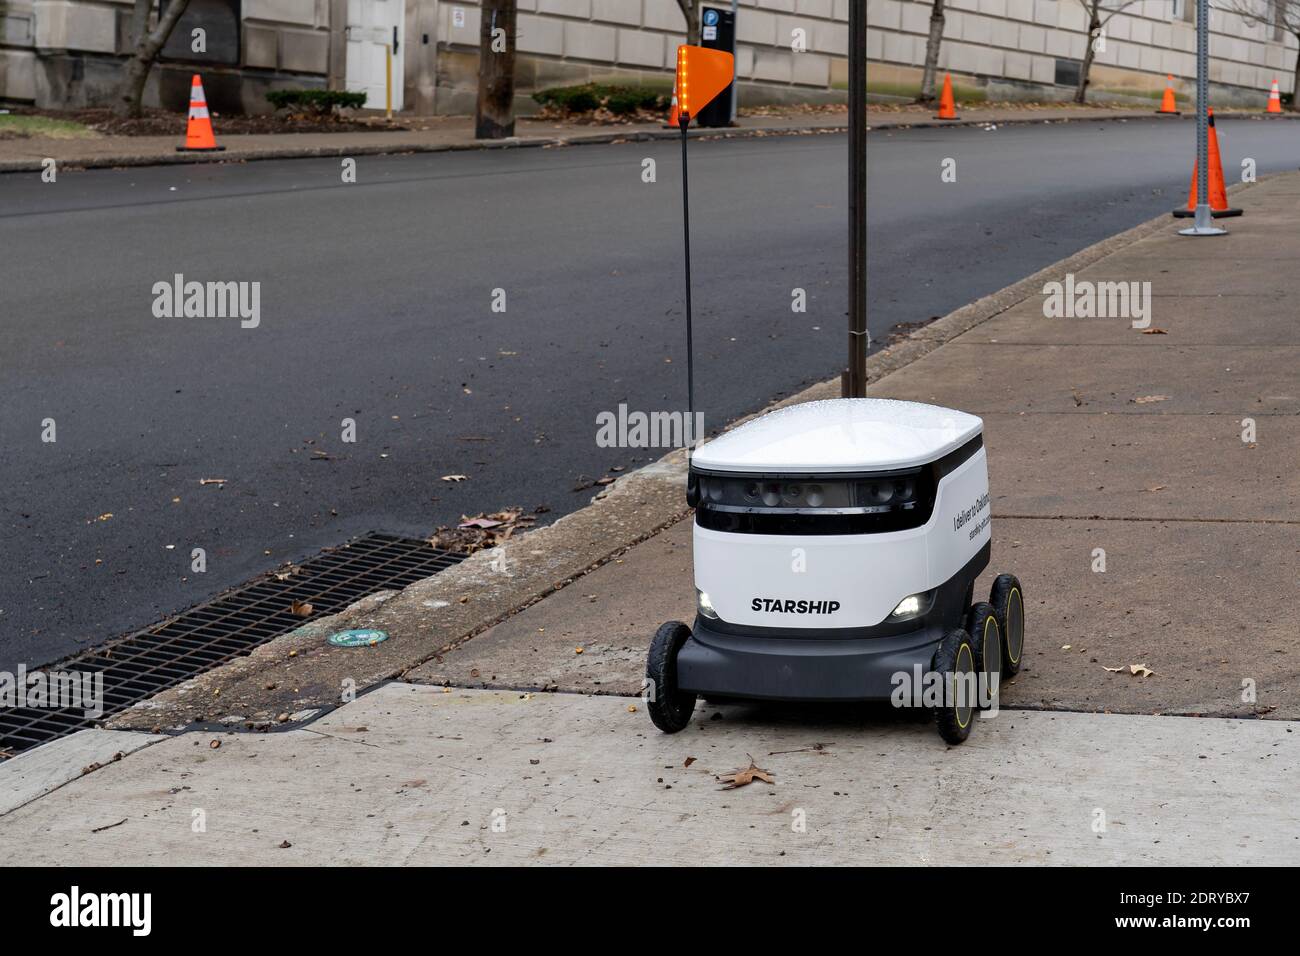 A Starship food delivery robot is driving on the sidewalk in University of Pittsburgh campus in Pittsburgh, PA, USA. Stock Photo